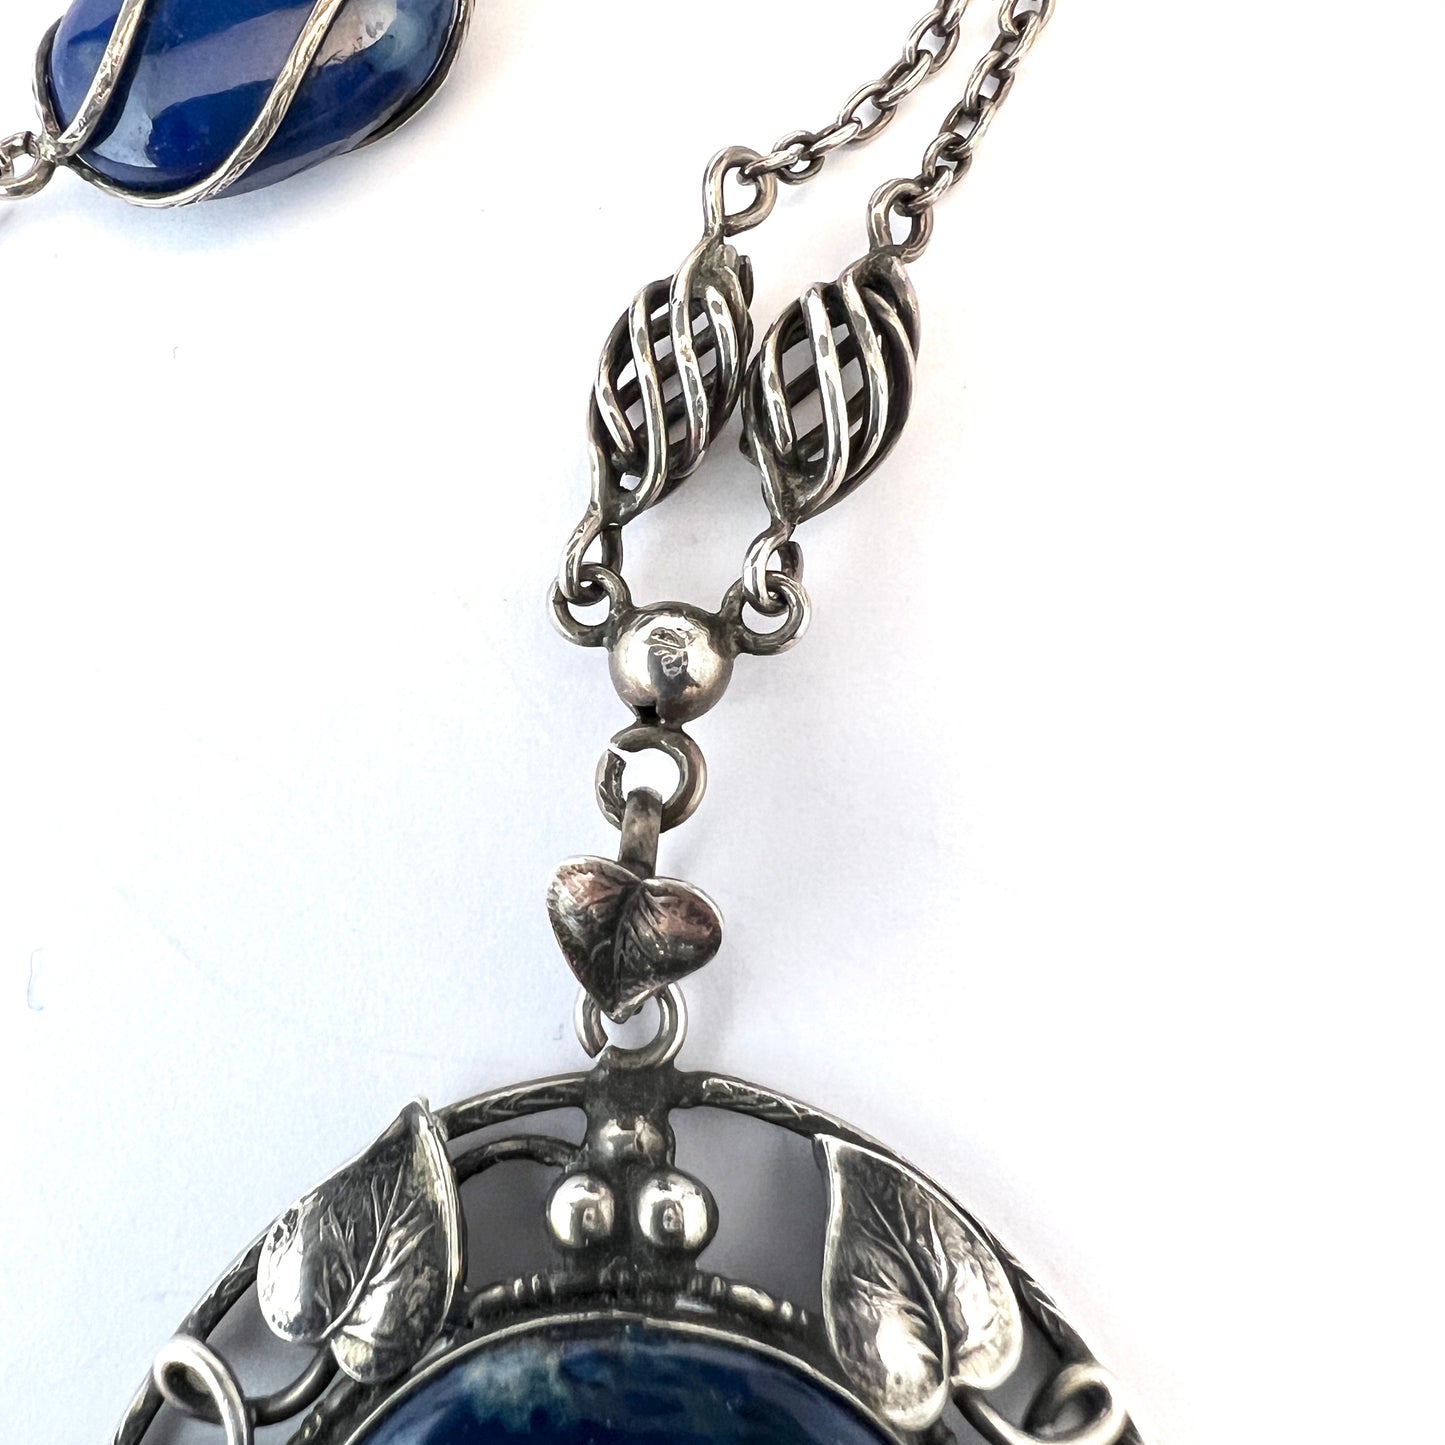 Antique Arts & Crafts Sterling Silver Swiss Lapis Necklace.